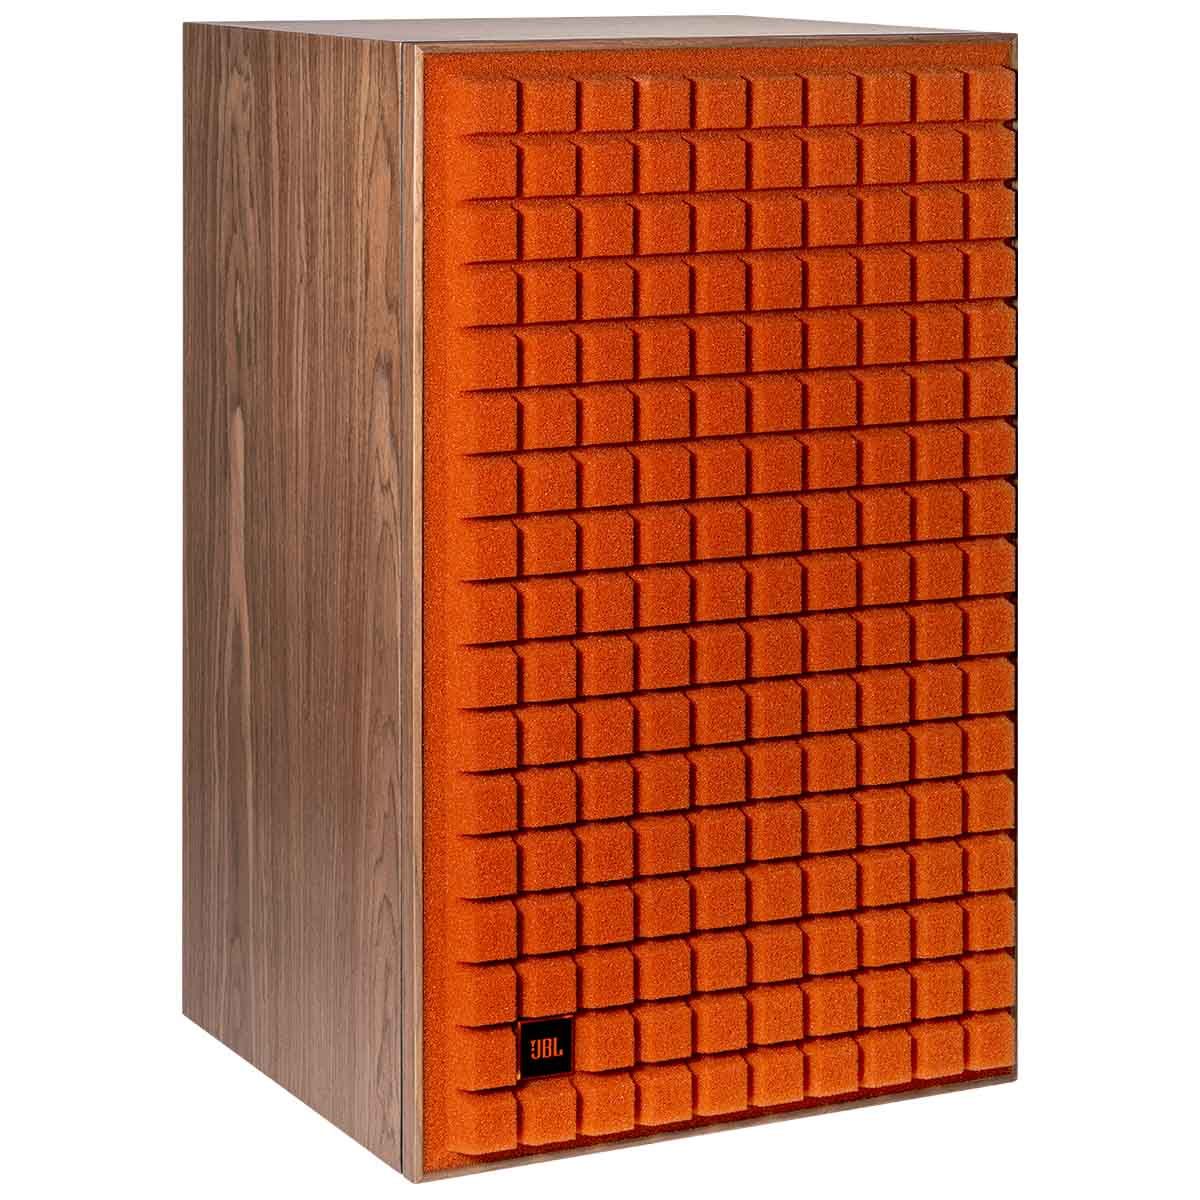 JBL L100 Classic MKII Loudspeaker Orange angled left front view with grille